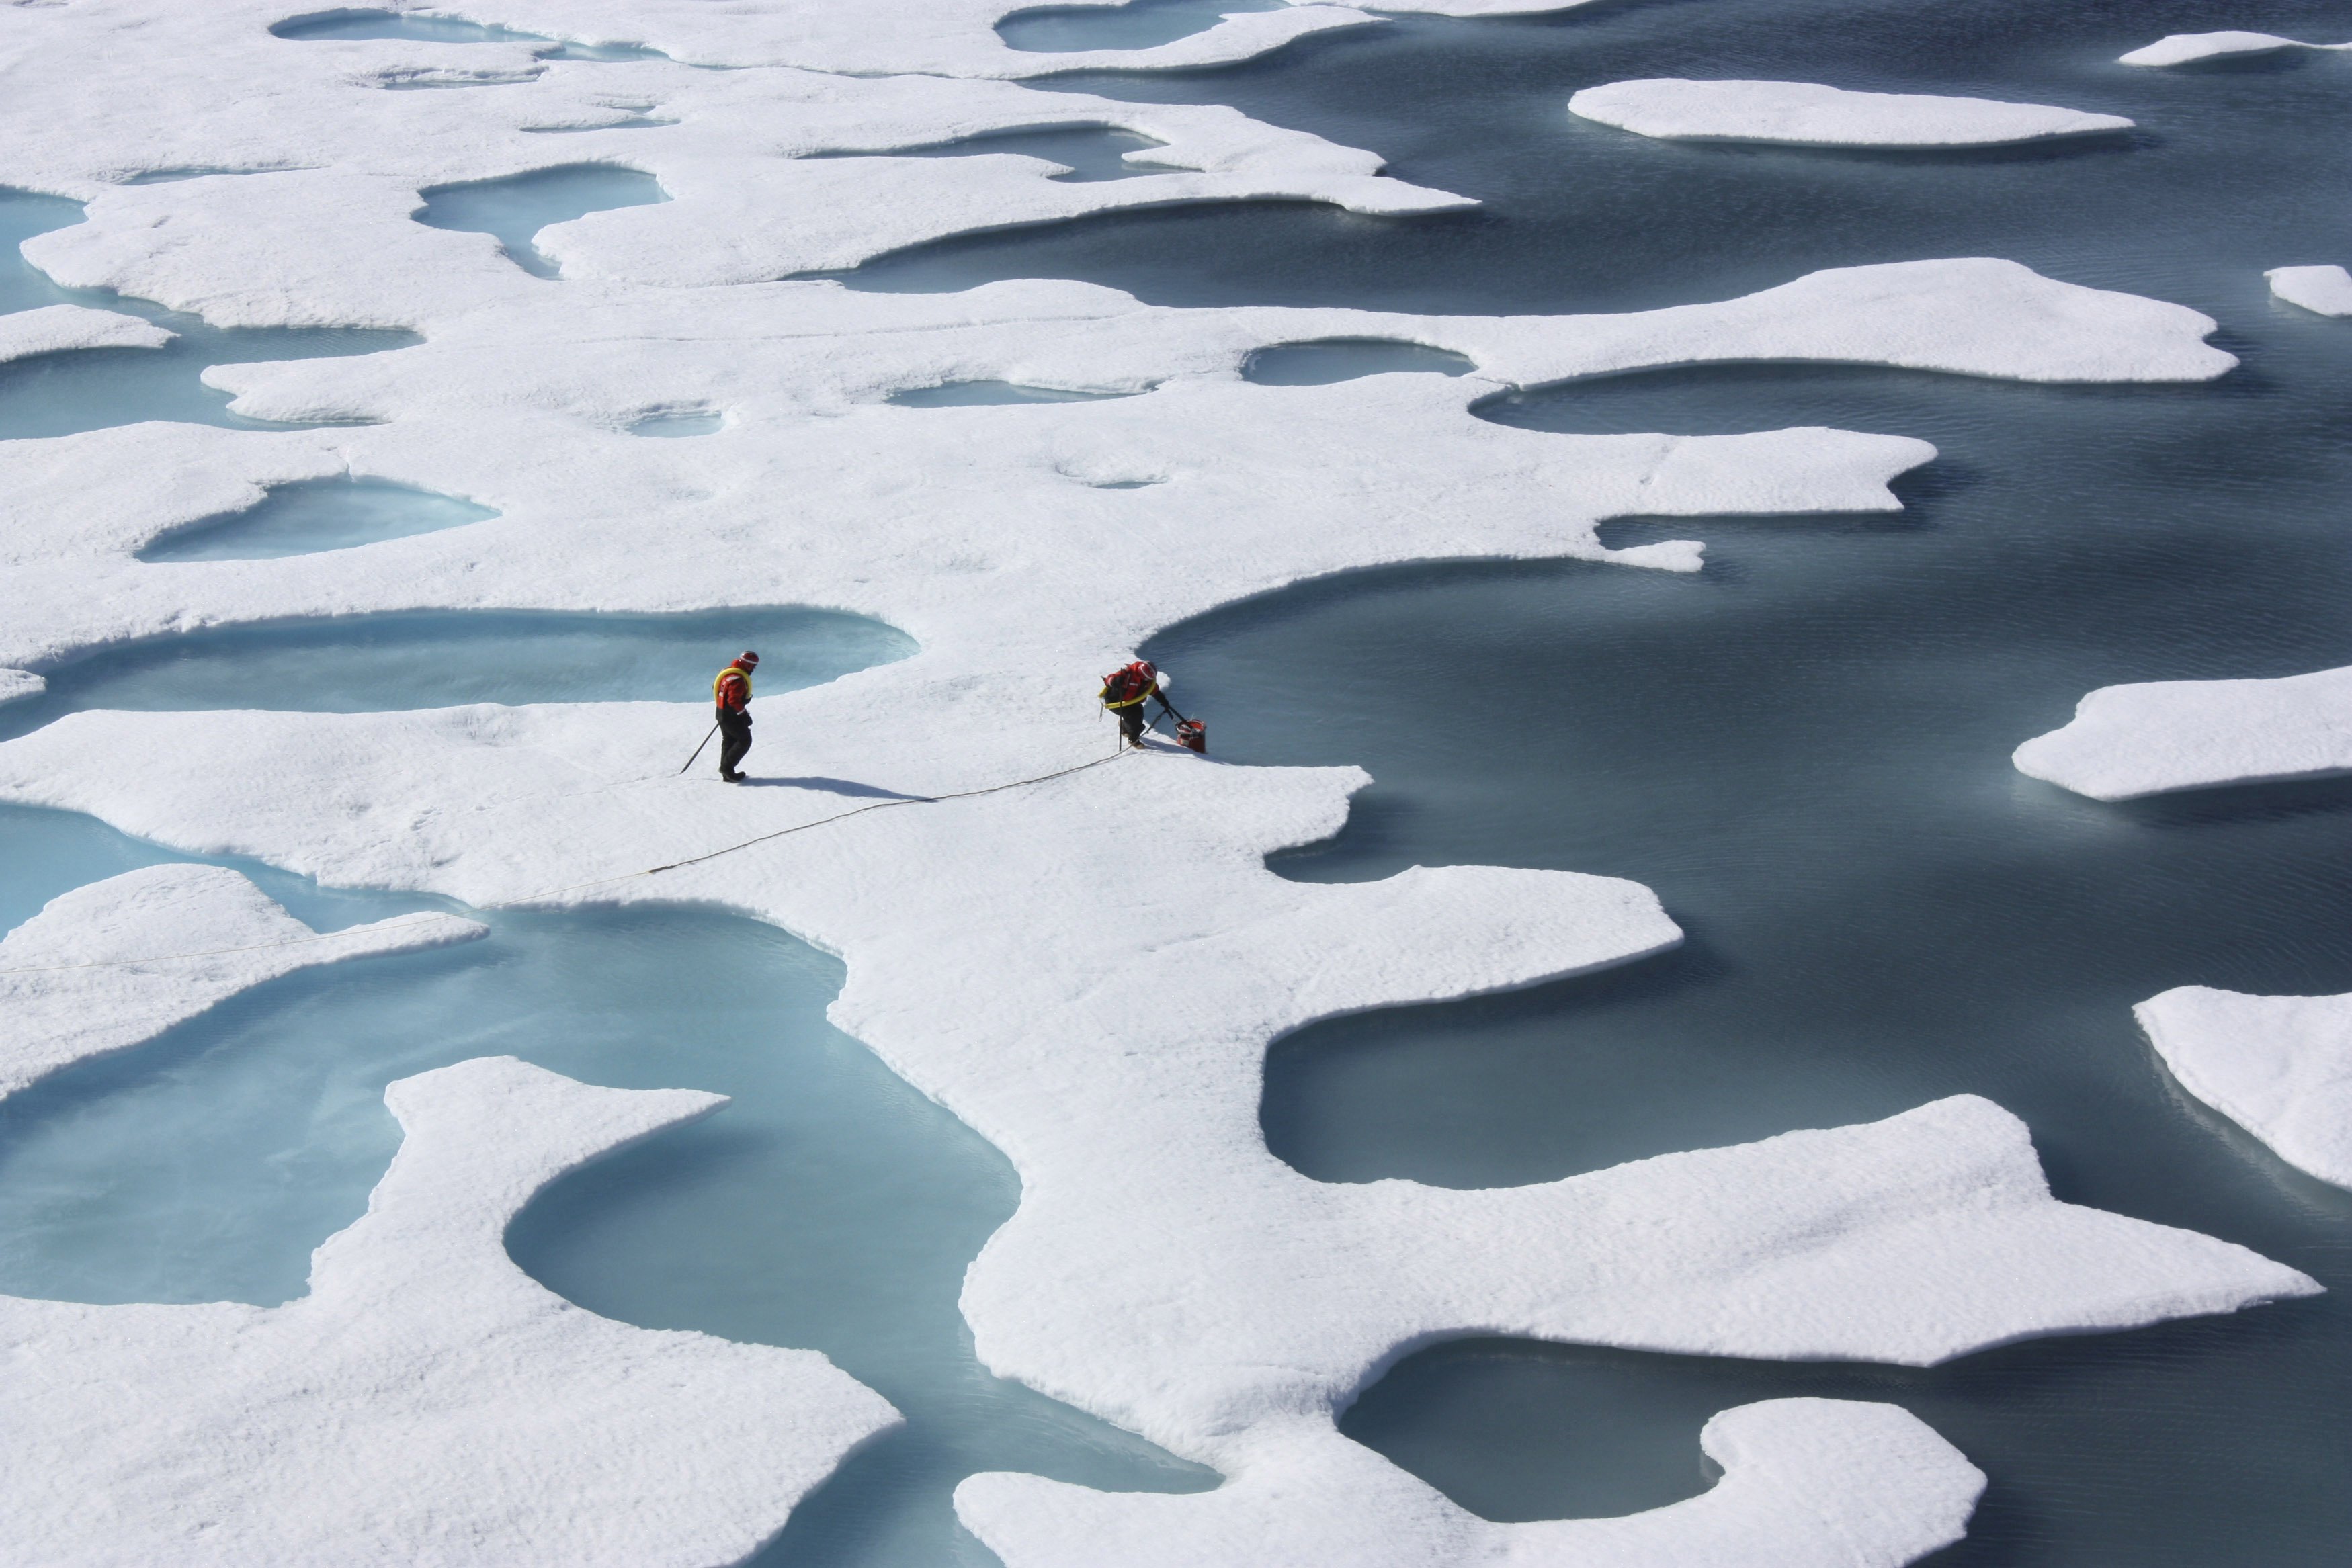 The crew of the  U.S. Coast Guard Cutter Healy, in the midst of their ICESCAPE mission, retrieves supplies in the Arctic Ocean in this July 12, 2011 NASA handout photo.  Kathryn Hansen/NASA via REUTERS/File Photo